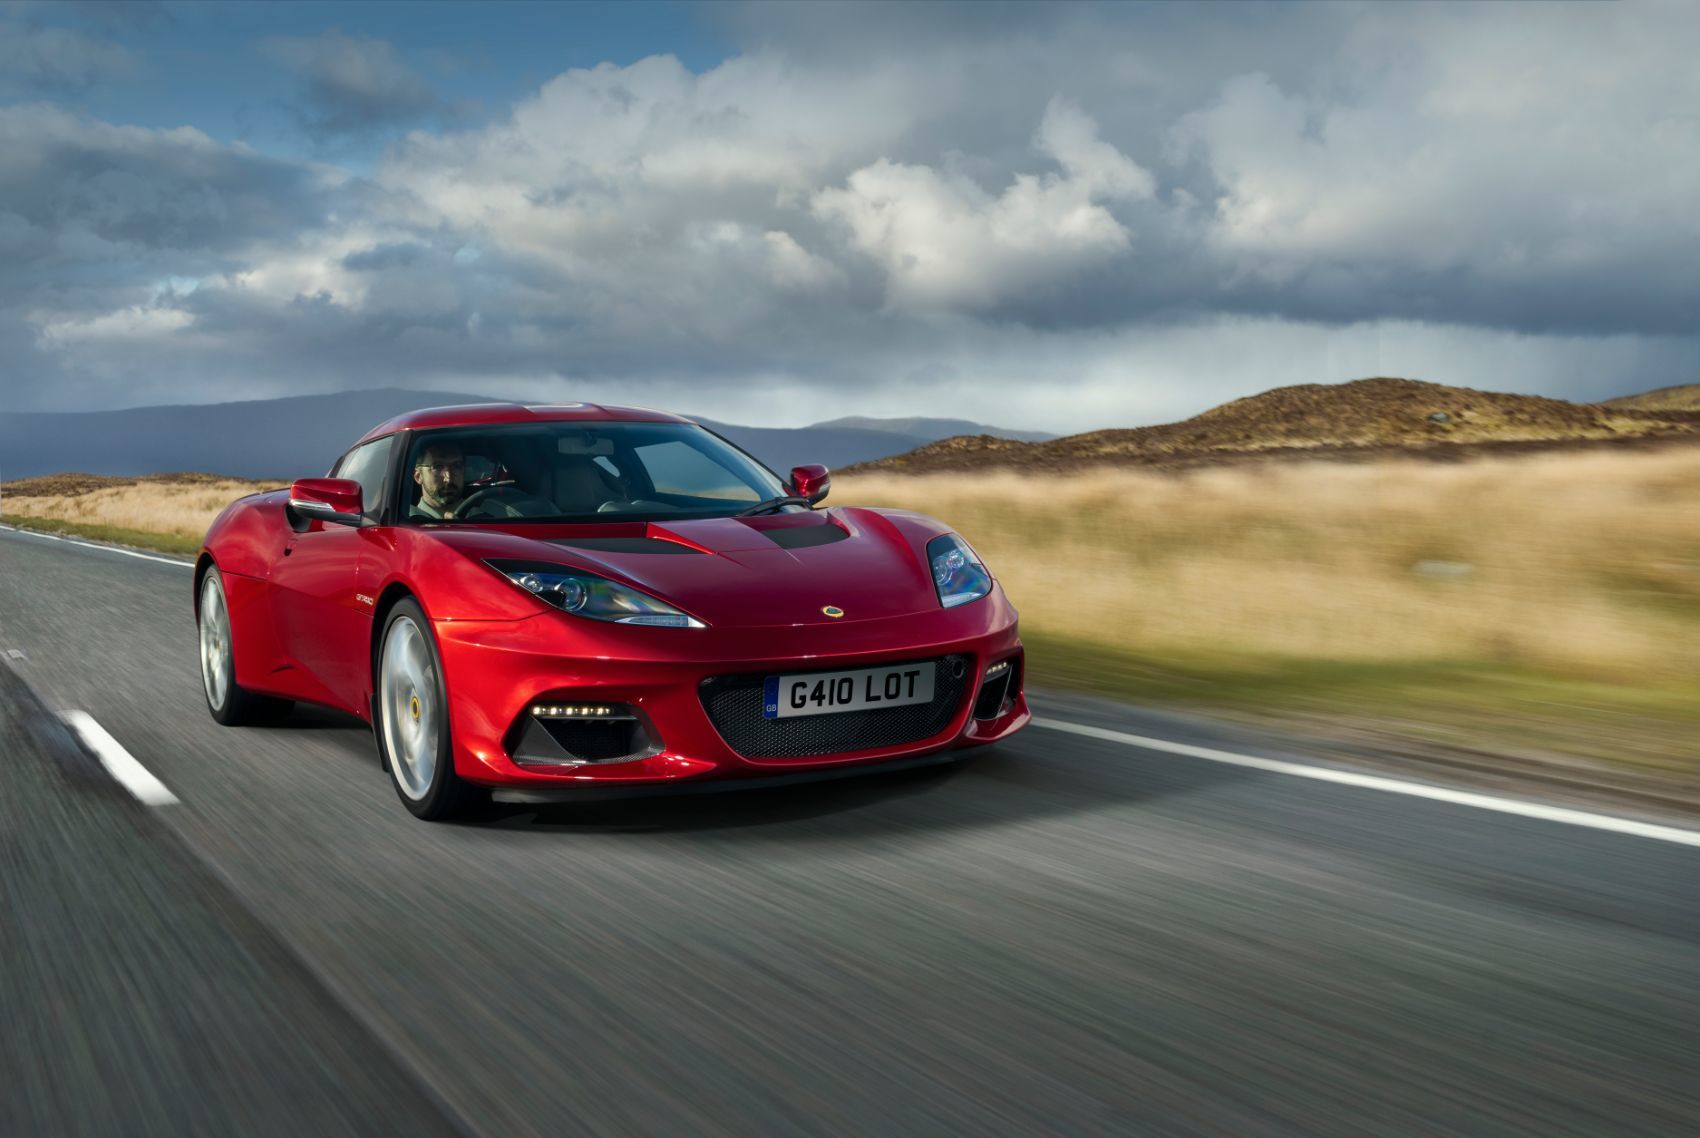 Lotus Evora GT410: Not Coming To America. But We Want It!